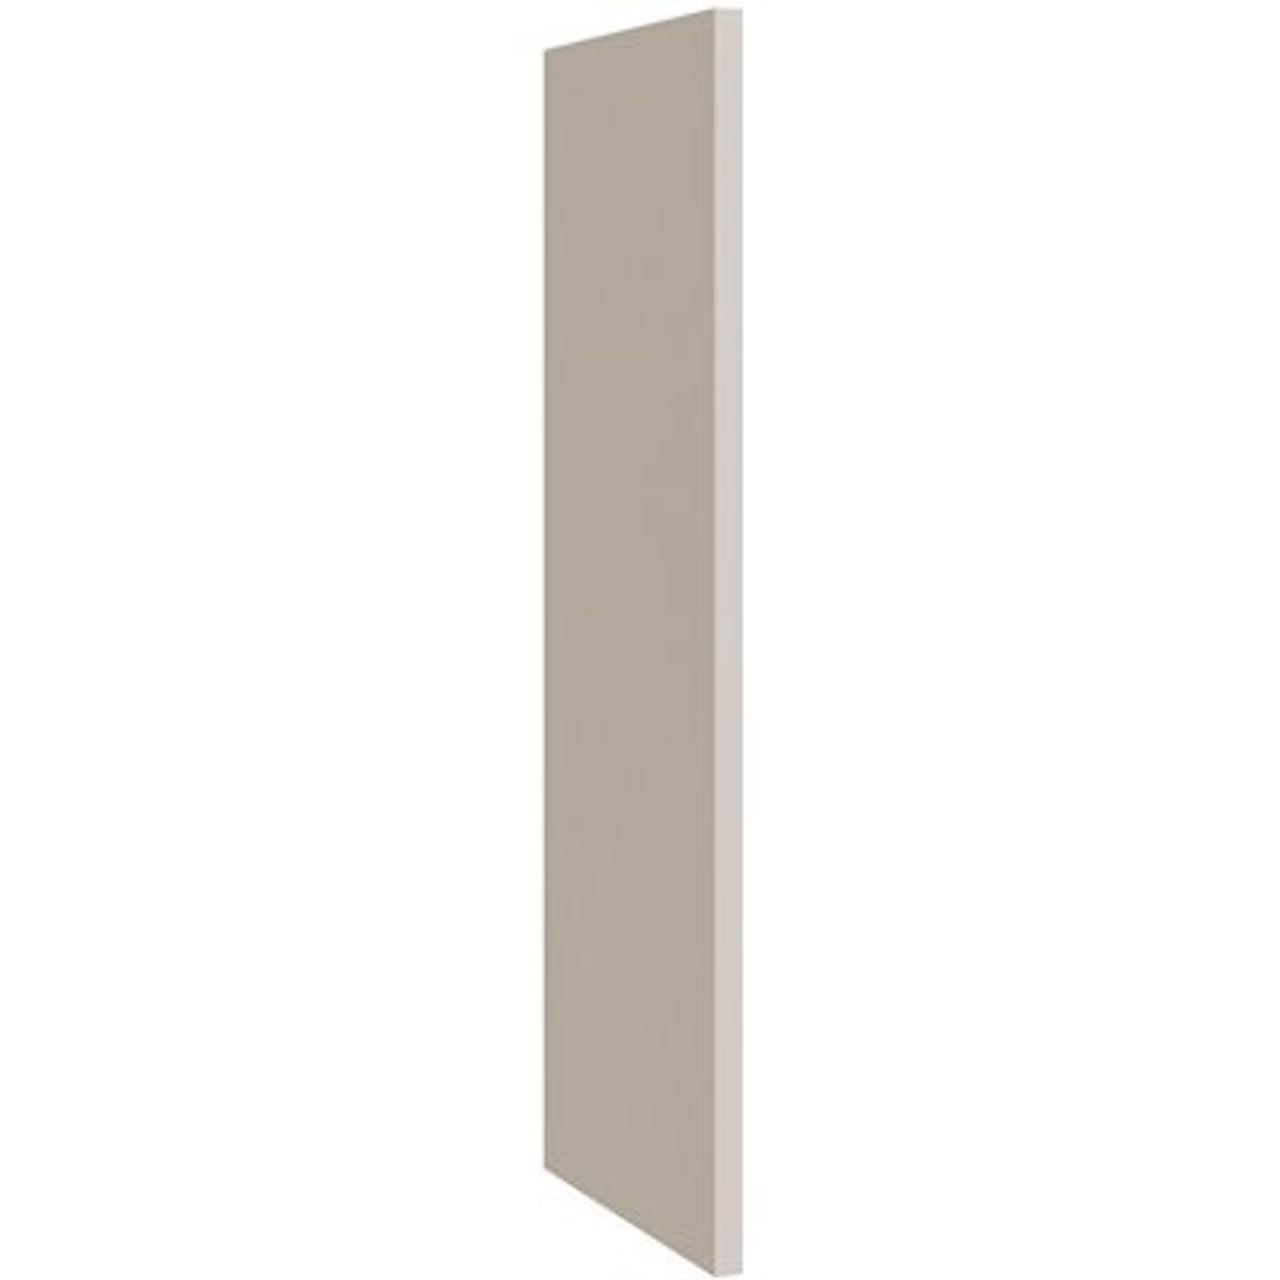 CNC Cabinetry Luxor Wall End Skin, 0.25"w X 96"h X 23.25"d, Shaker Misty Grey